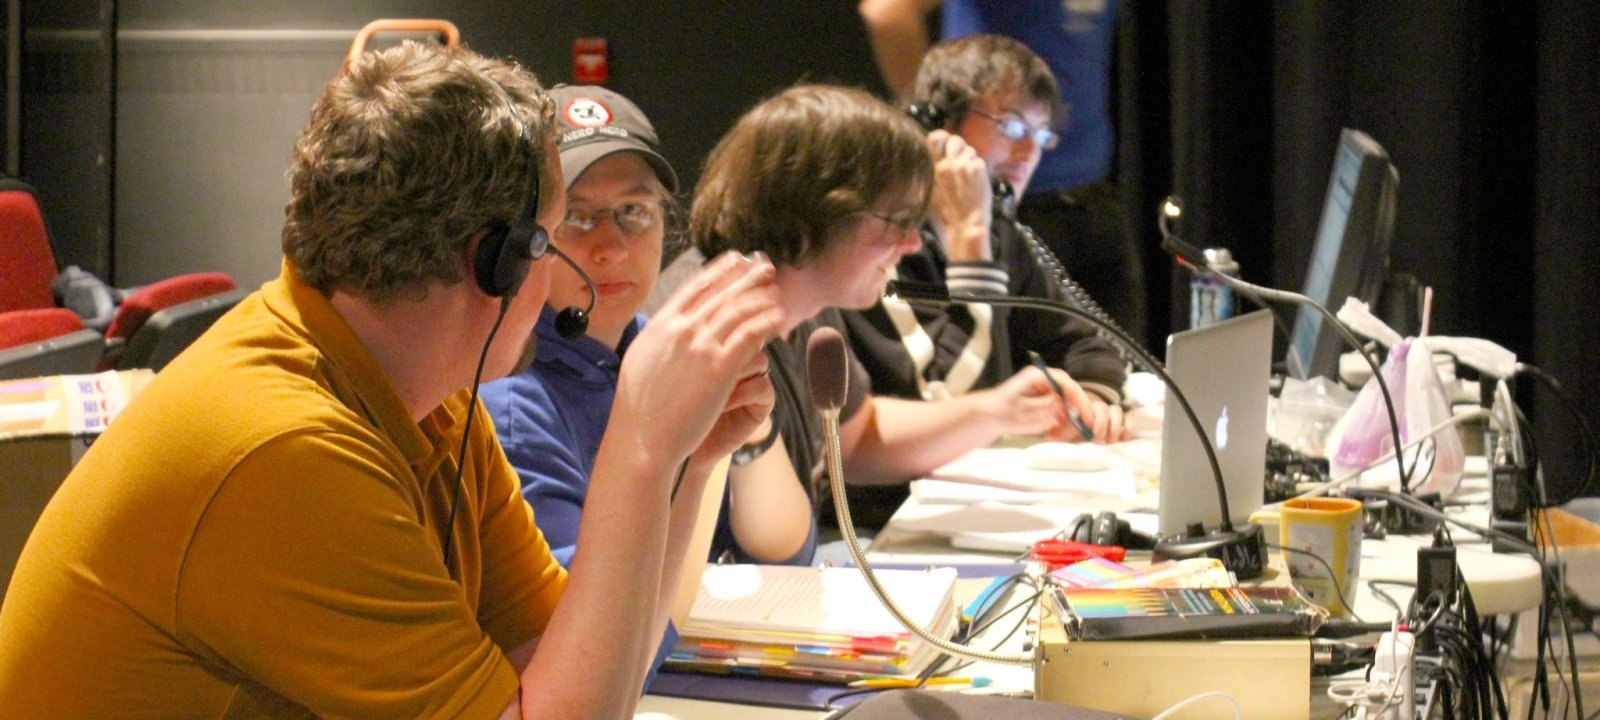 Students sitting backstage at a table with laptops, they have headsets and microphones on and are discussing with each other.